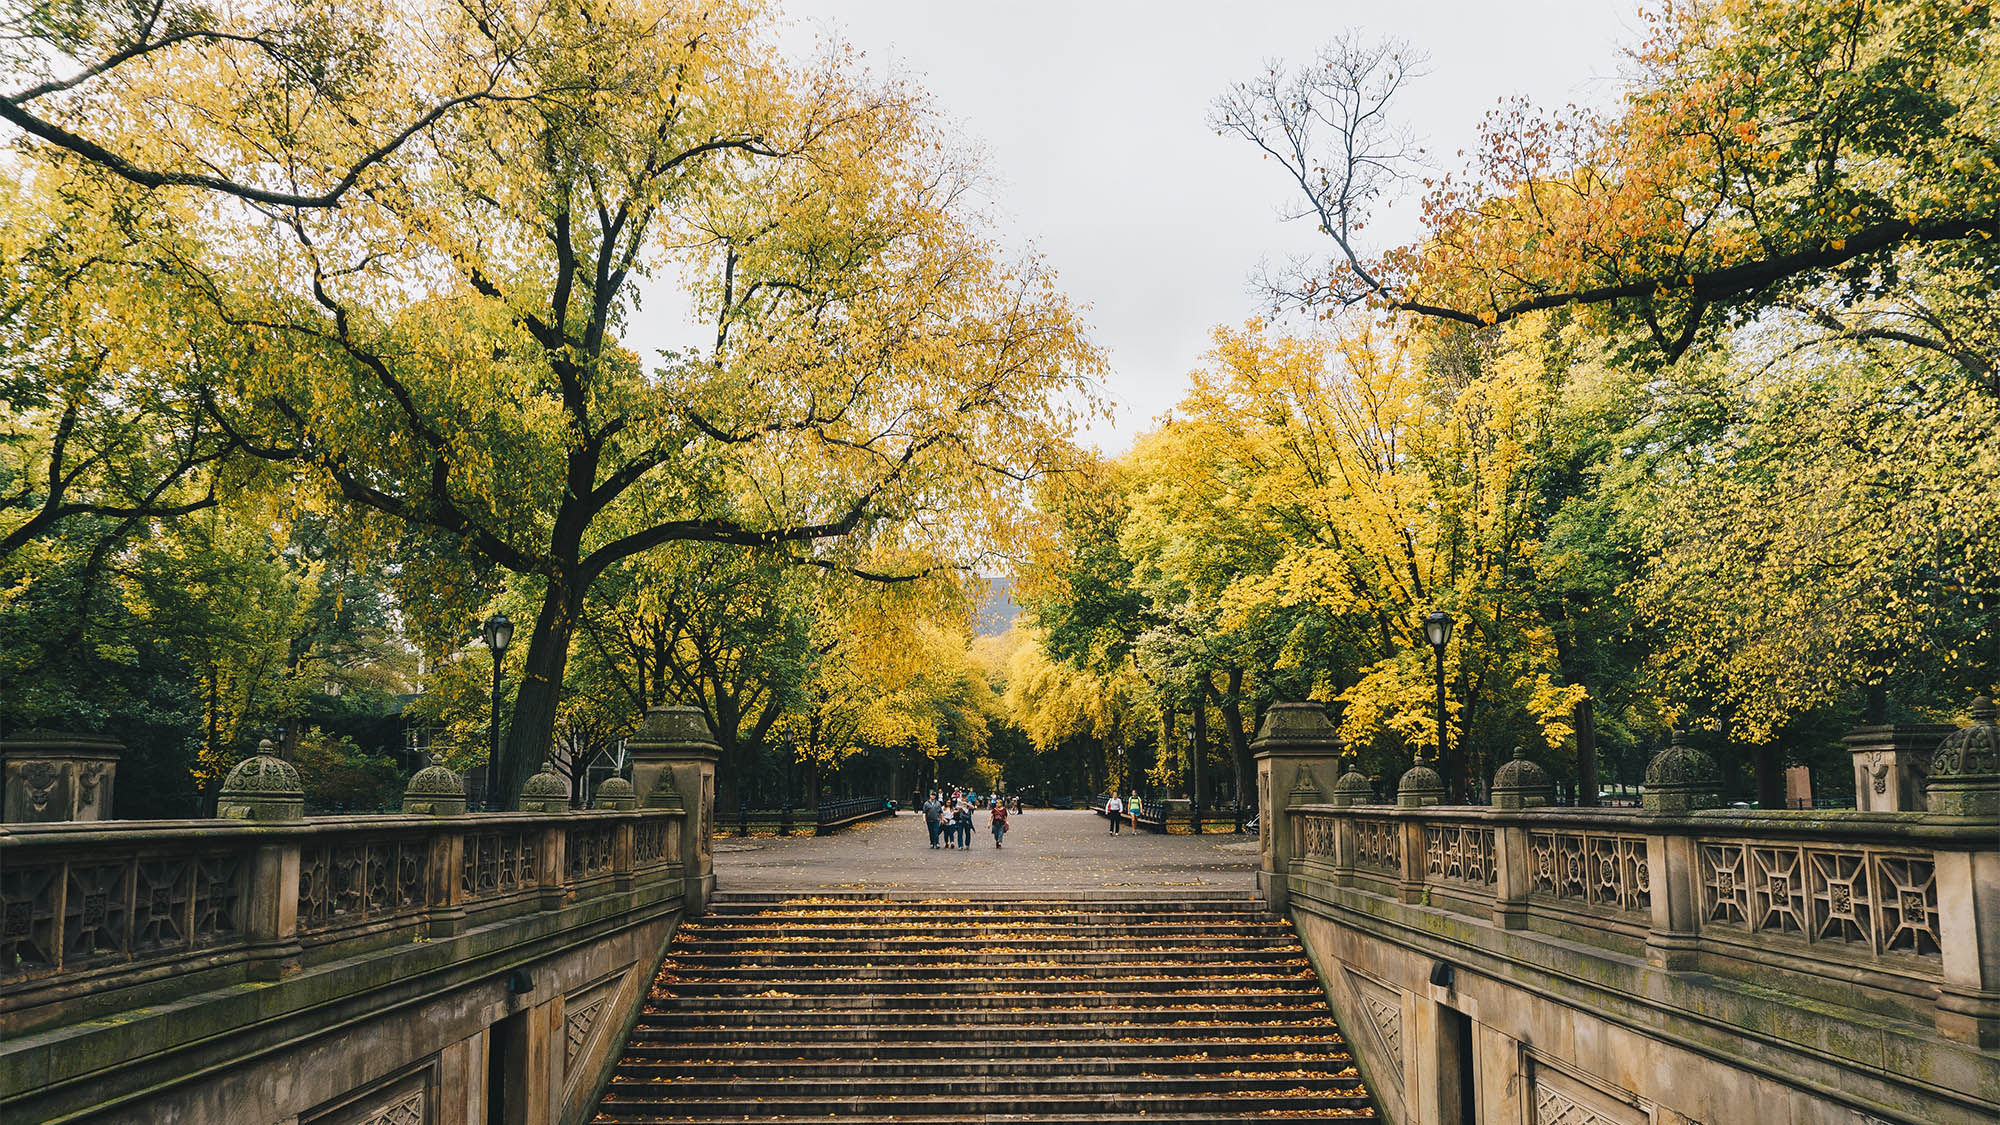 Central Park stairs flanked by trees with green and yellow leaves